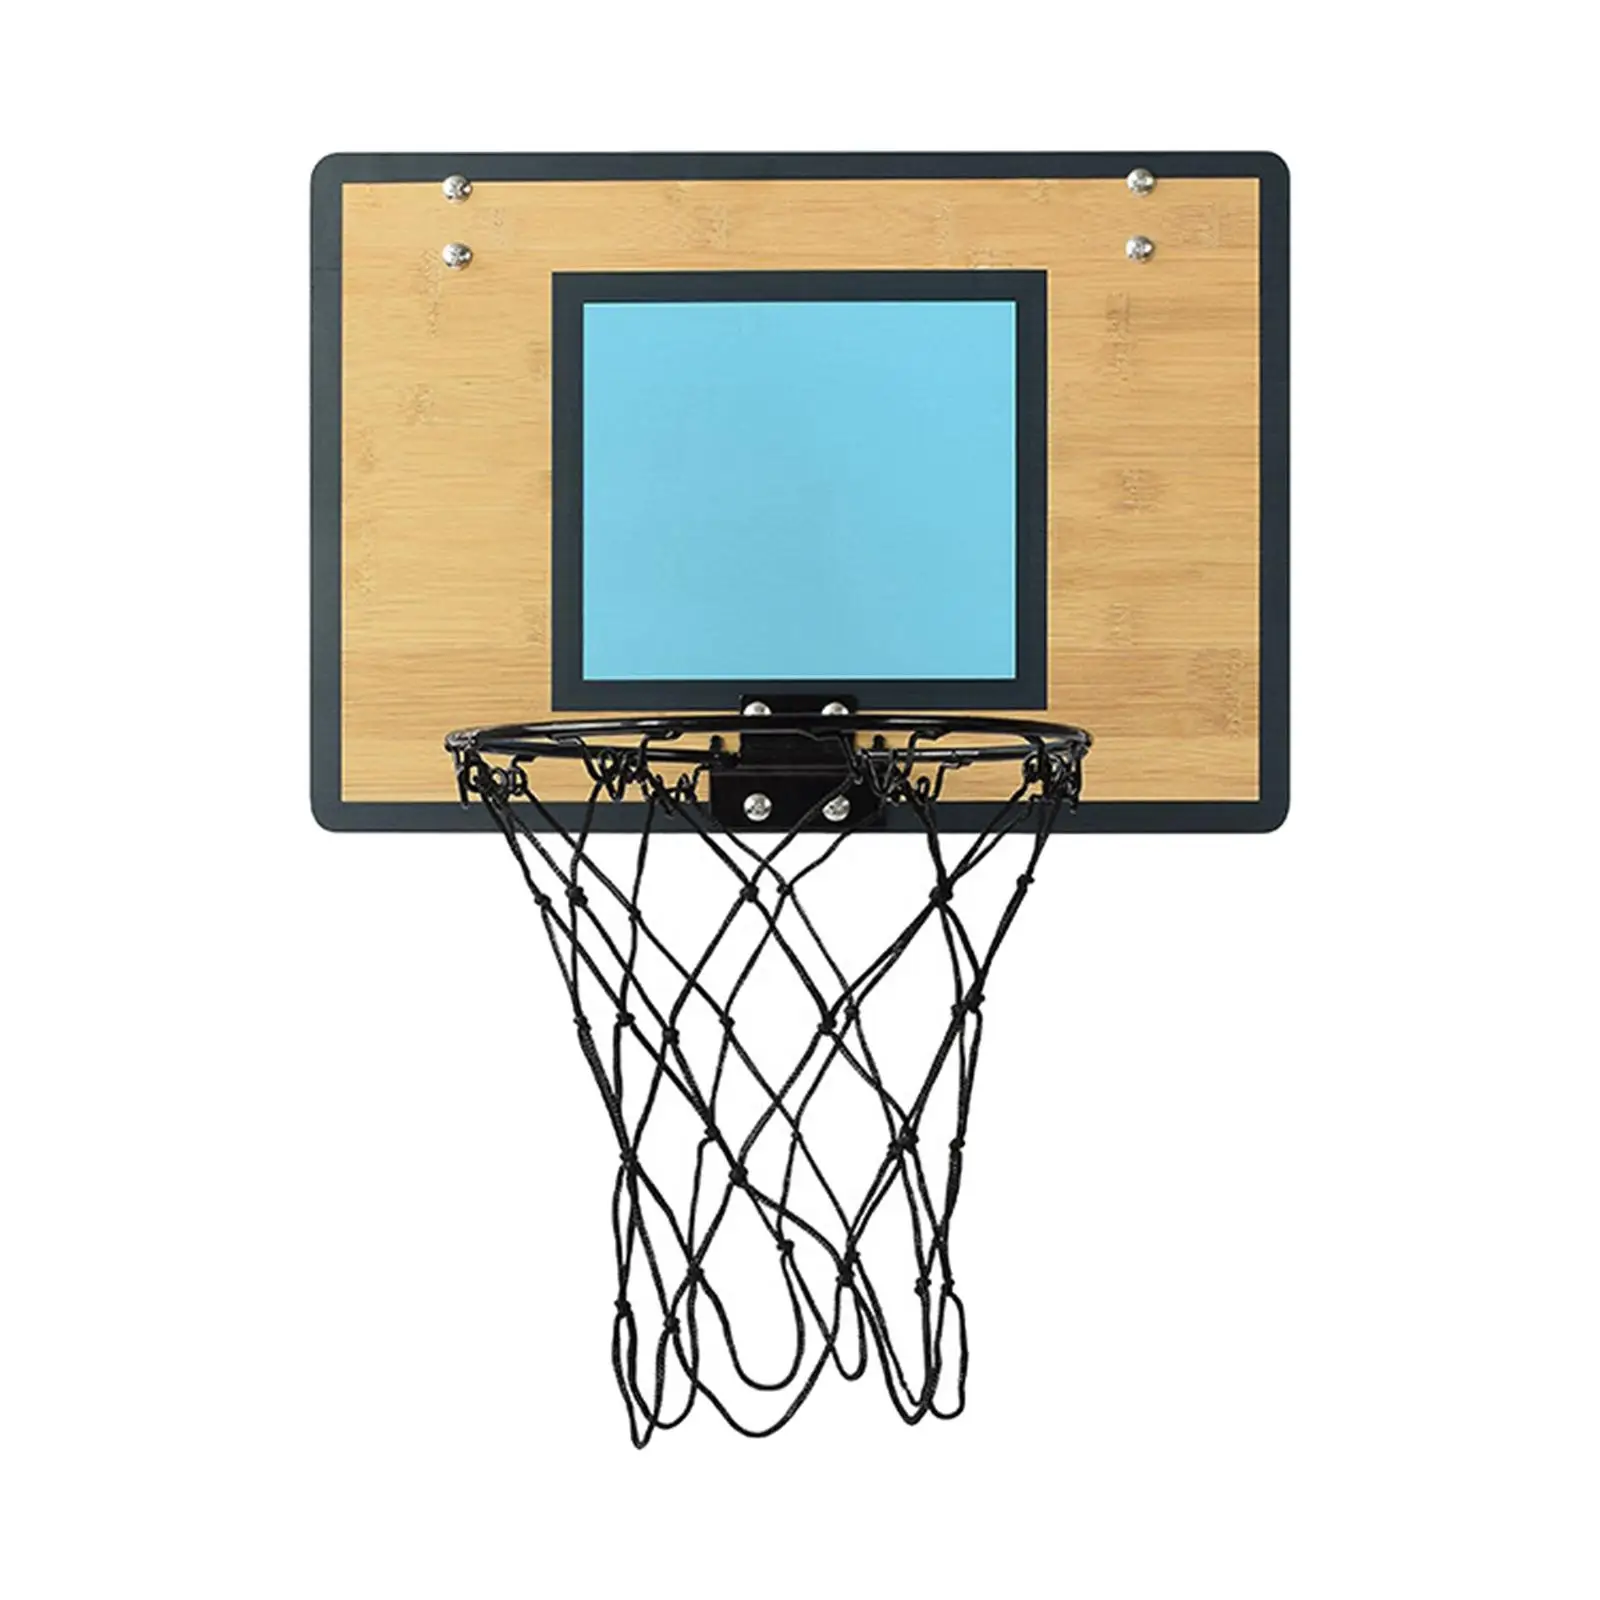 Mini Basketball Hoop Easy to Install Kids with Ball over The Door for Backyard Room Outdoor Dunking Gifts for Kids Boys Teens